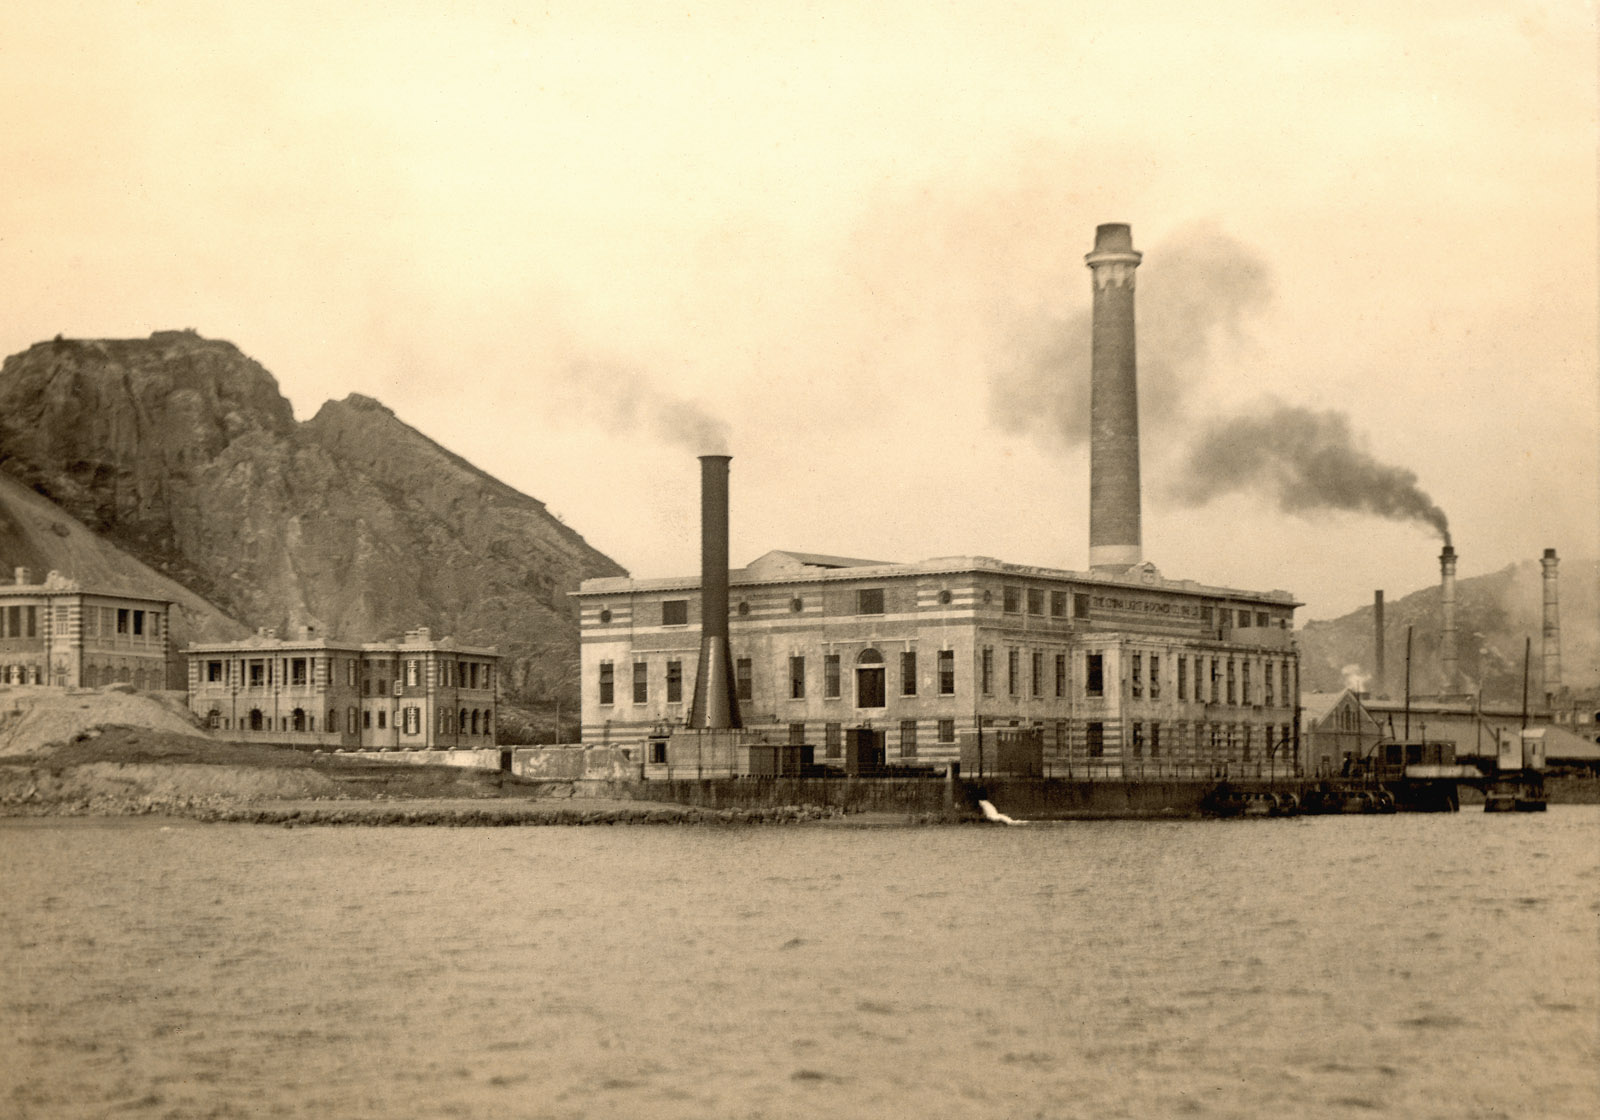 Hok Un Power Station in Hung Hom (1930)